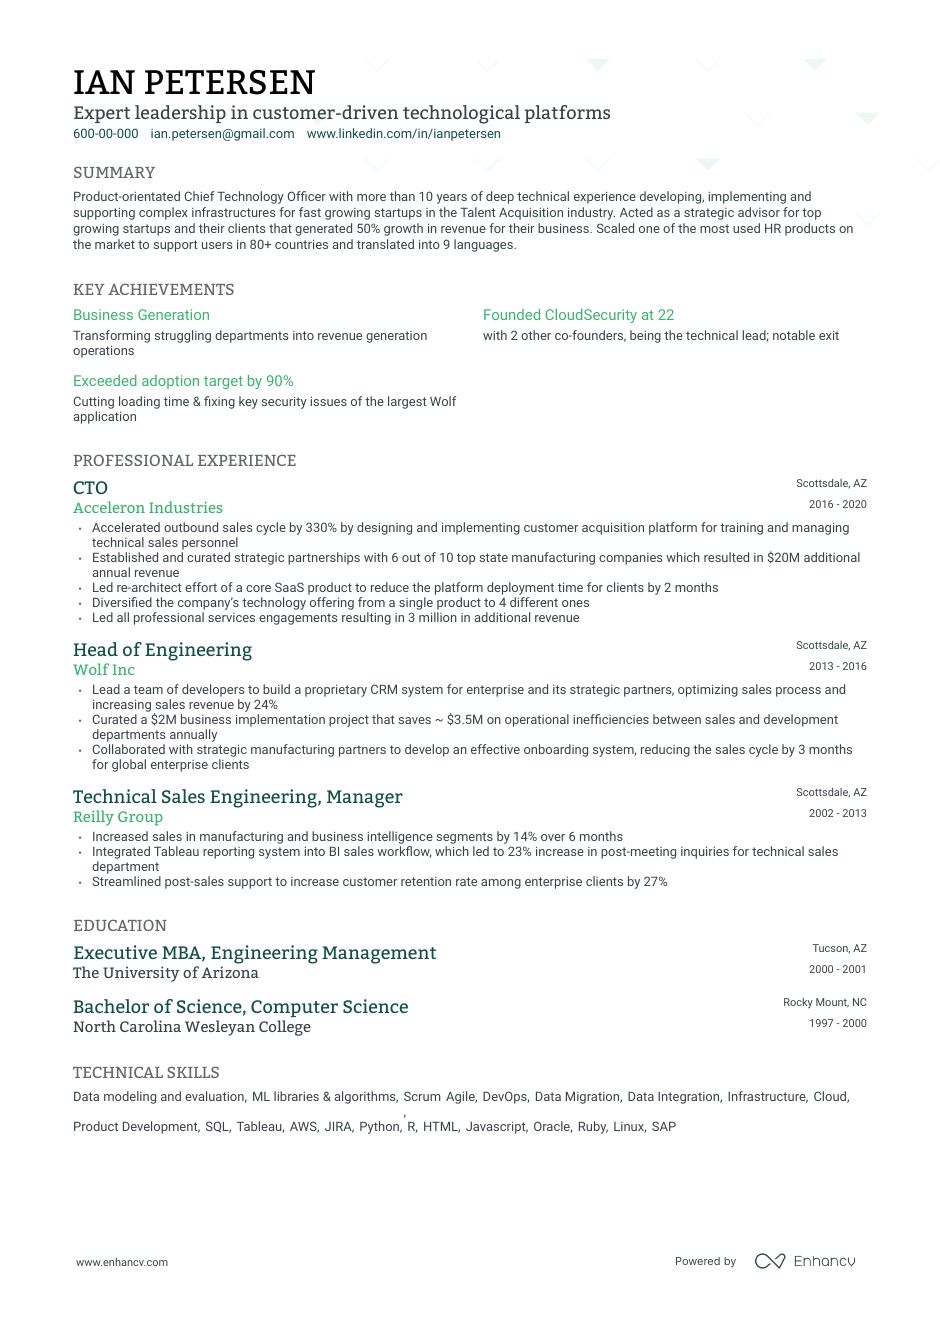 Executive CV template with a dark green accent color for headings, and a single column outline that outlines the content in a reverse chronological order